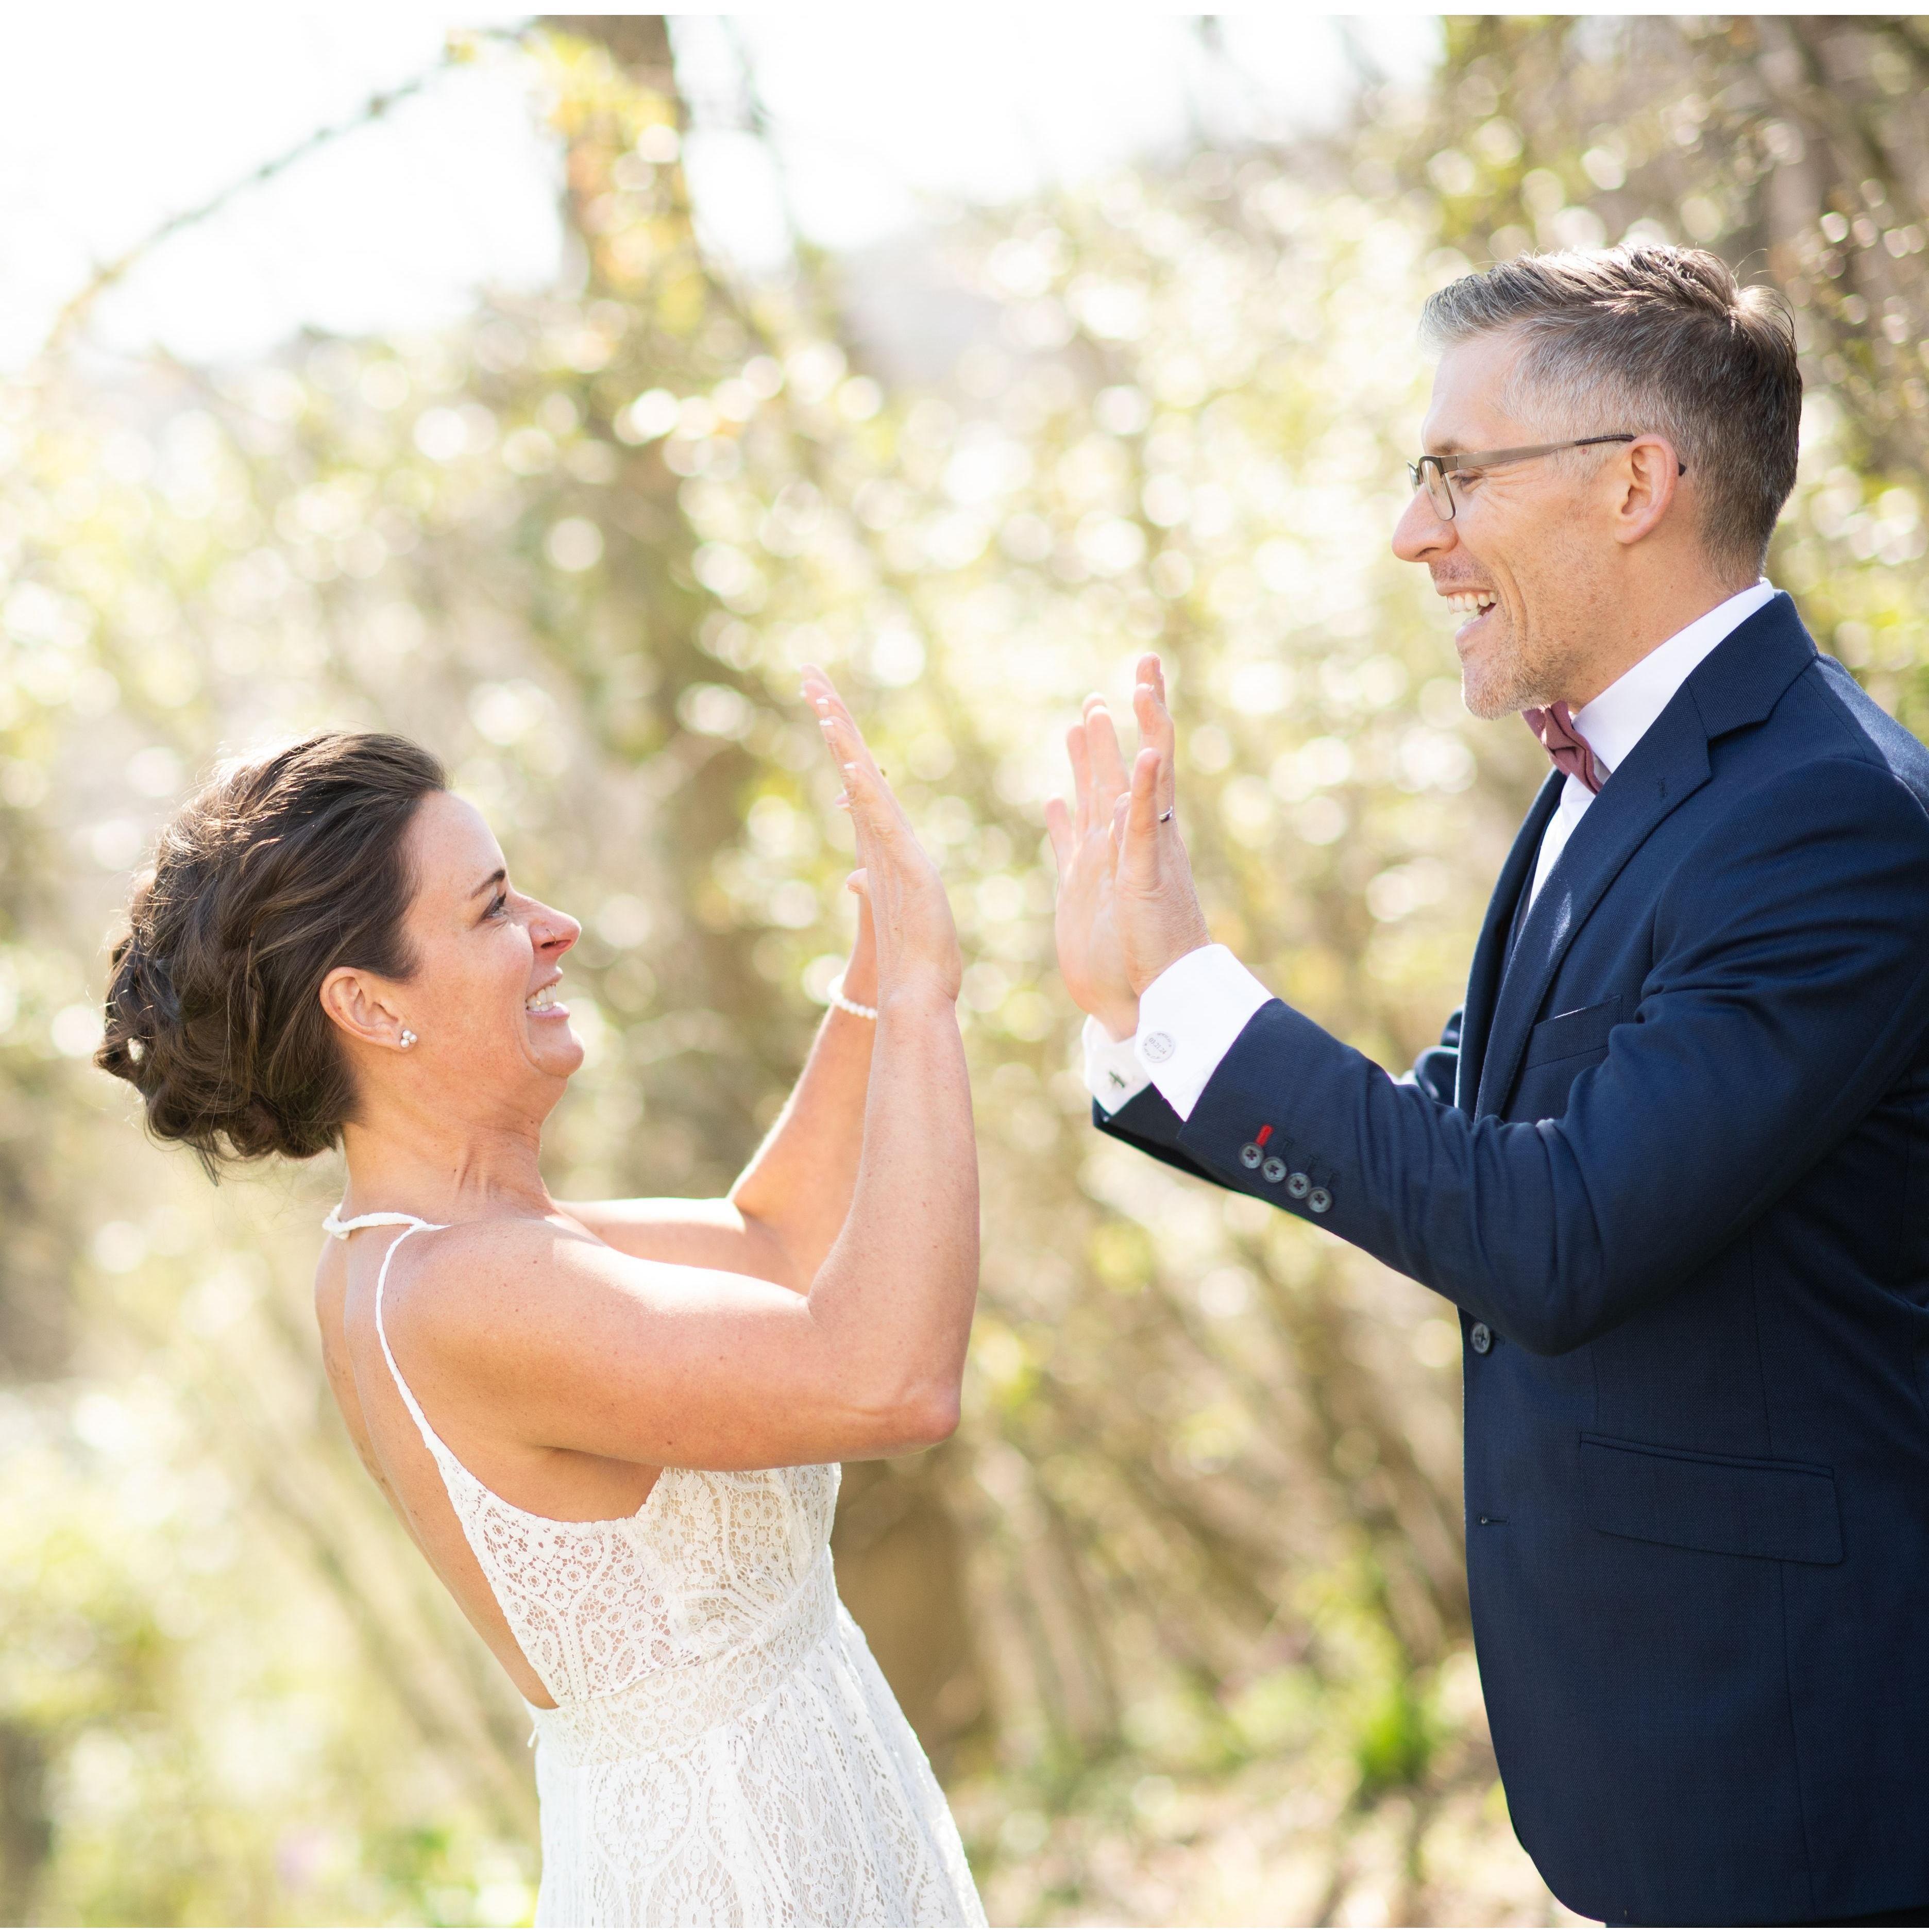 Who doesn't high-five after they get hitched?!